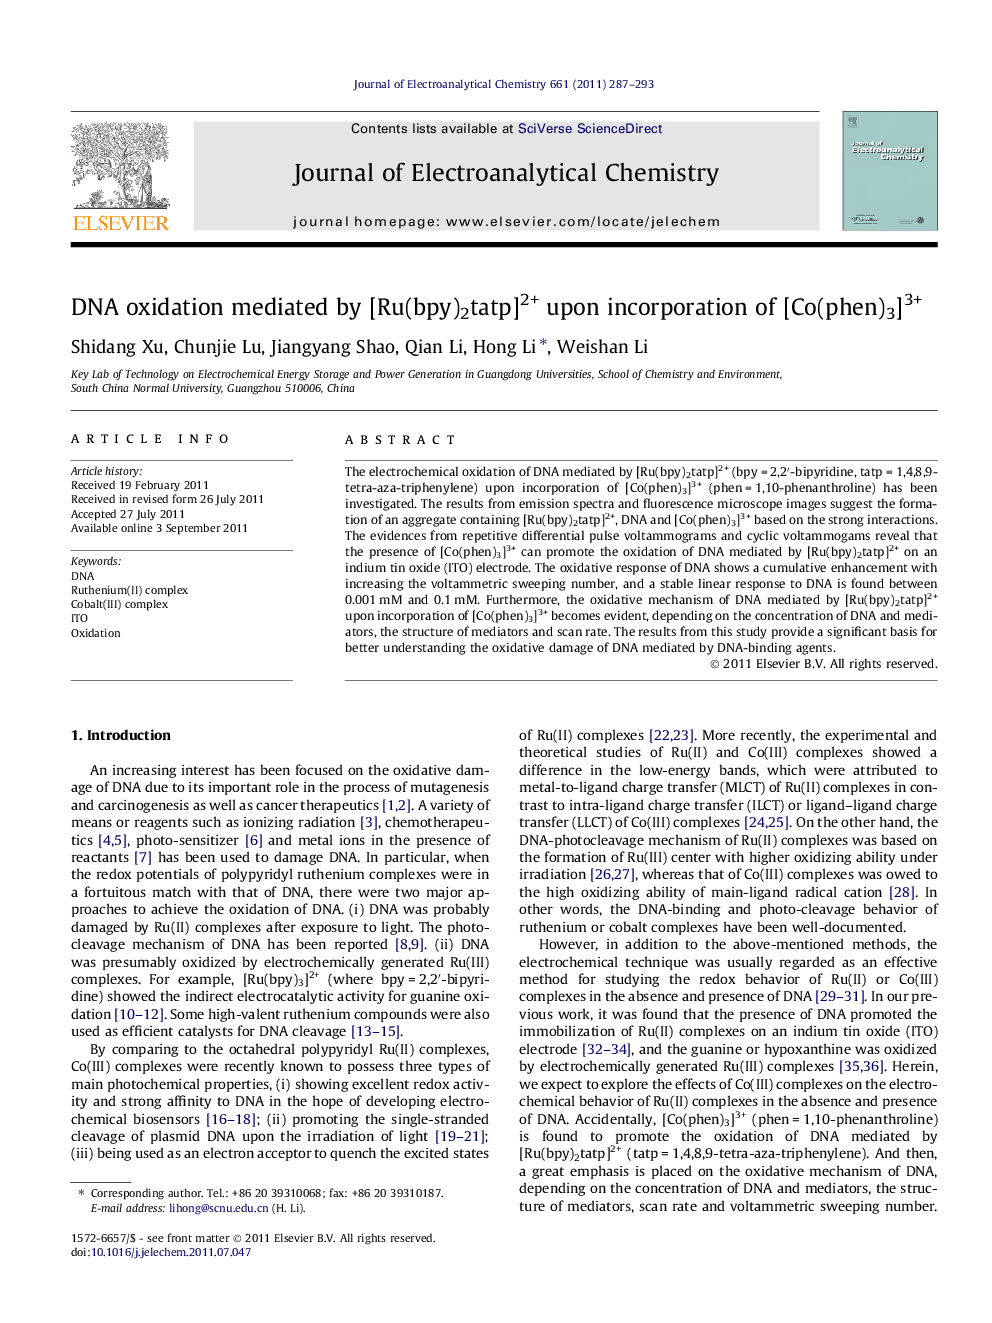 DNA oxidation mediated by [Ru(bpy)2tatp]2+ upon incorporation of [Co(phen)3]3+